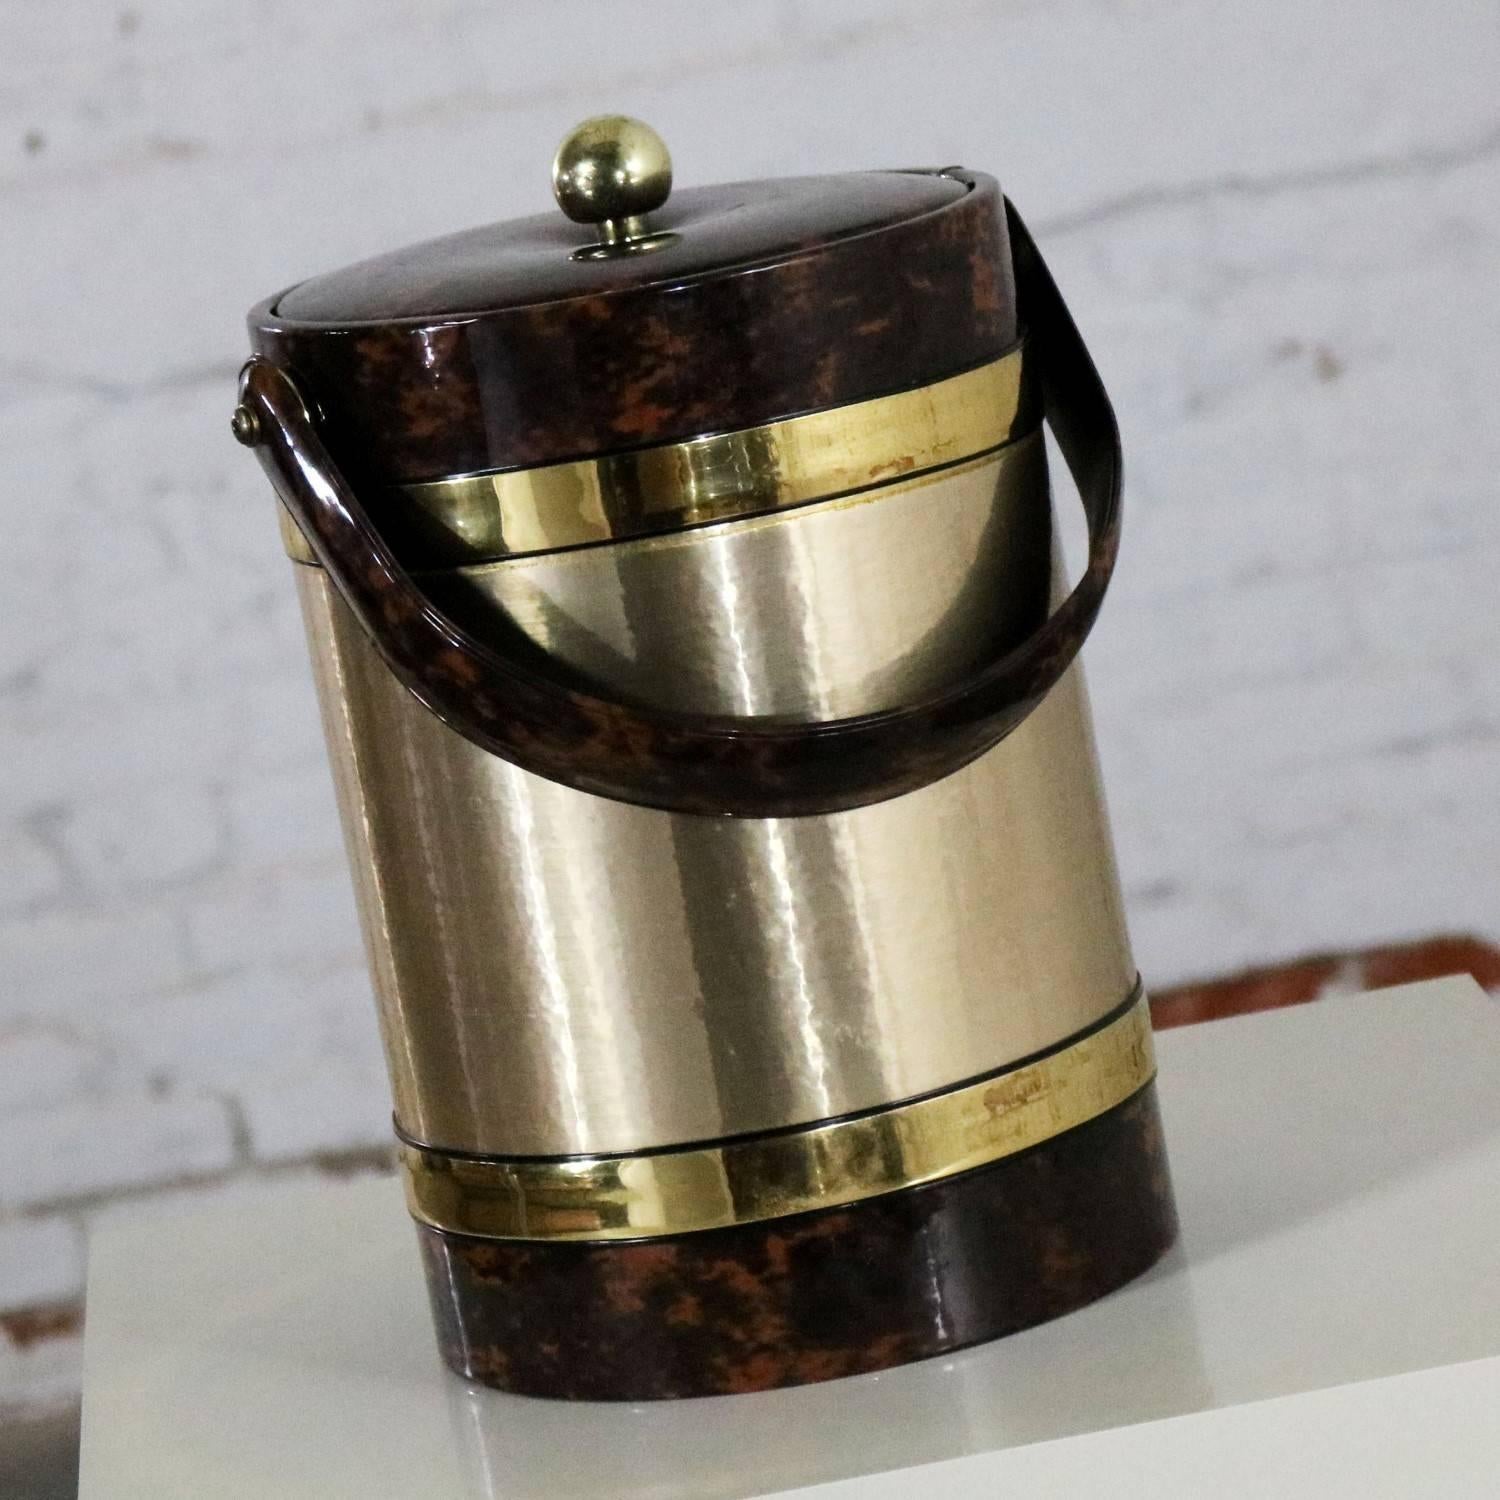 Handsome Mid-Century Modern ice bucket by George Briard in vinyl covering of gold and faux tortoiseshell. It is in wonderful vintage condition, clean inside, and ready to use. See photos, circa 1950s-1970s. 

We love this stately and sophisticated